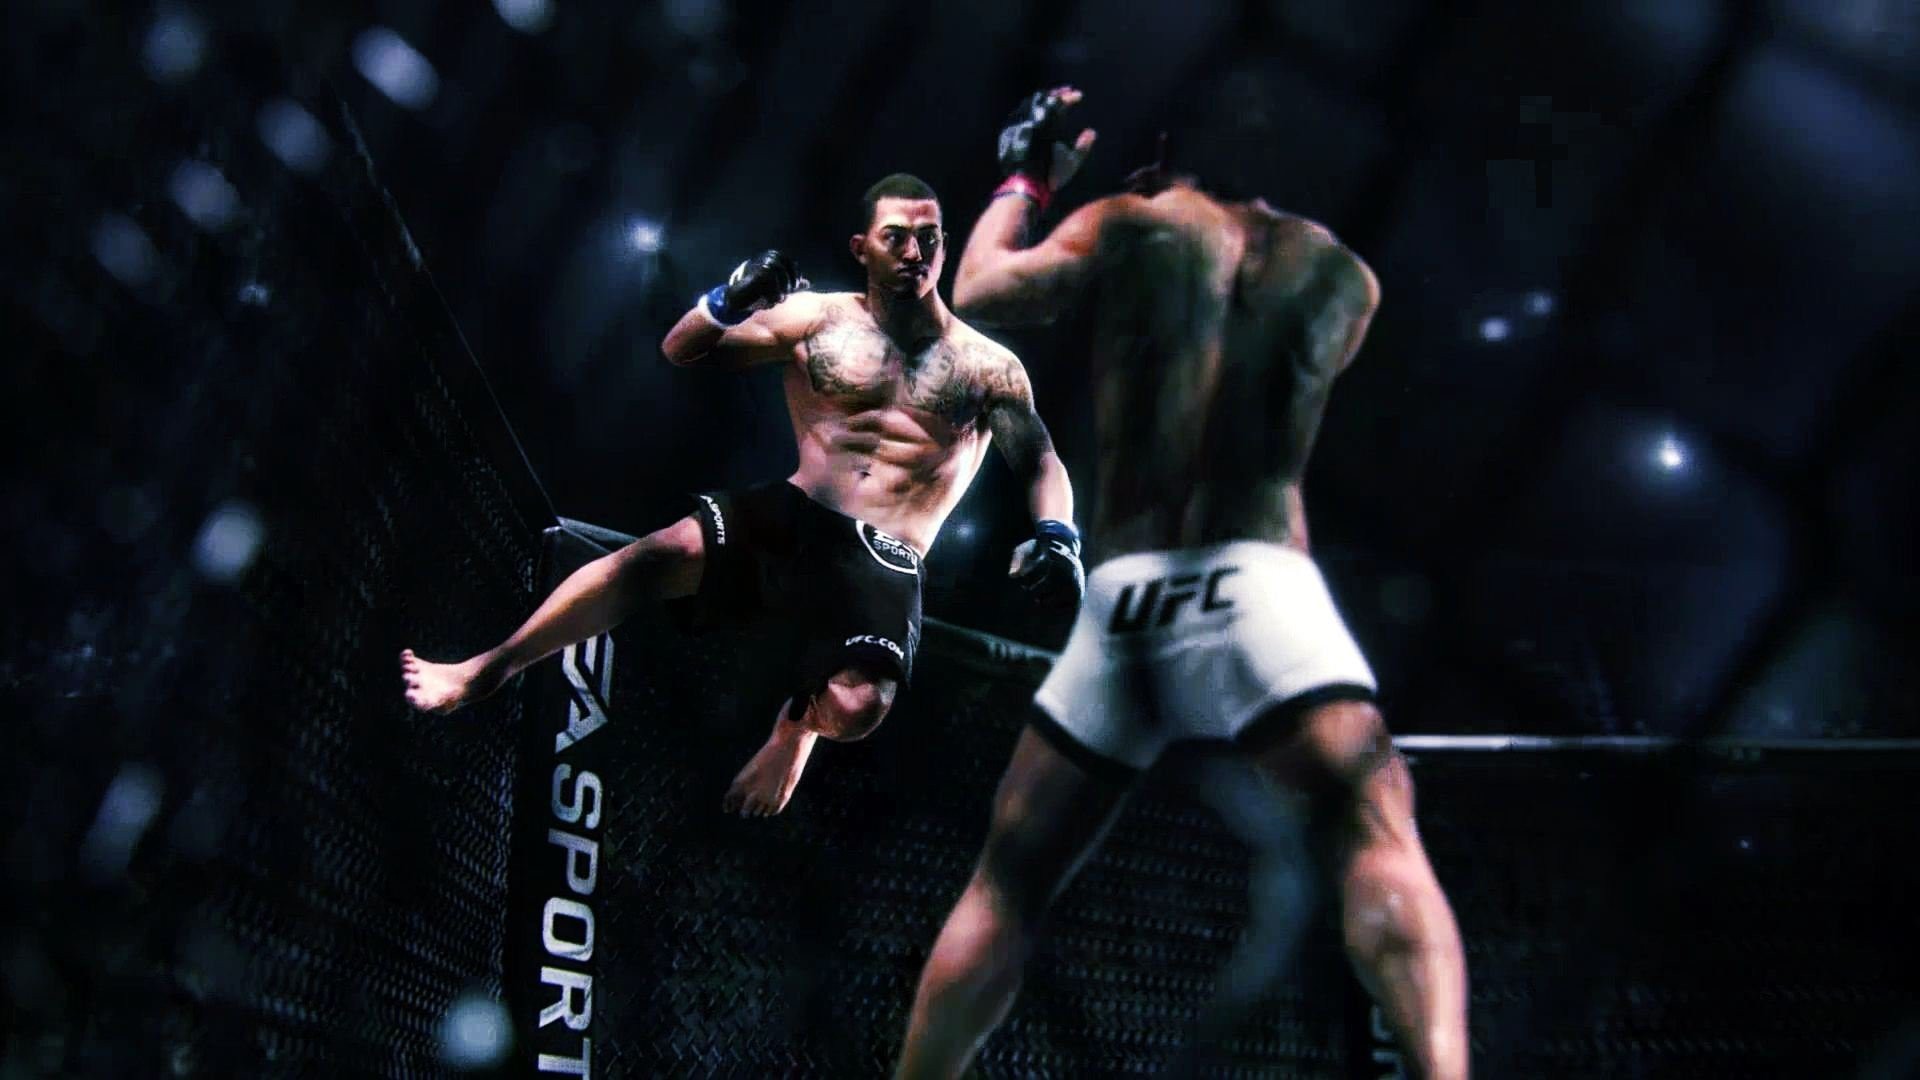 UFC Fighters Wallpaper (78+ images)1920 x 1080